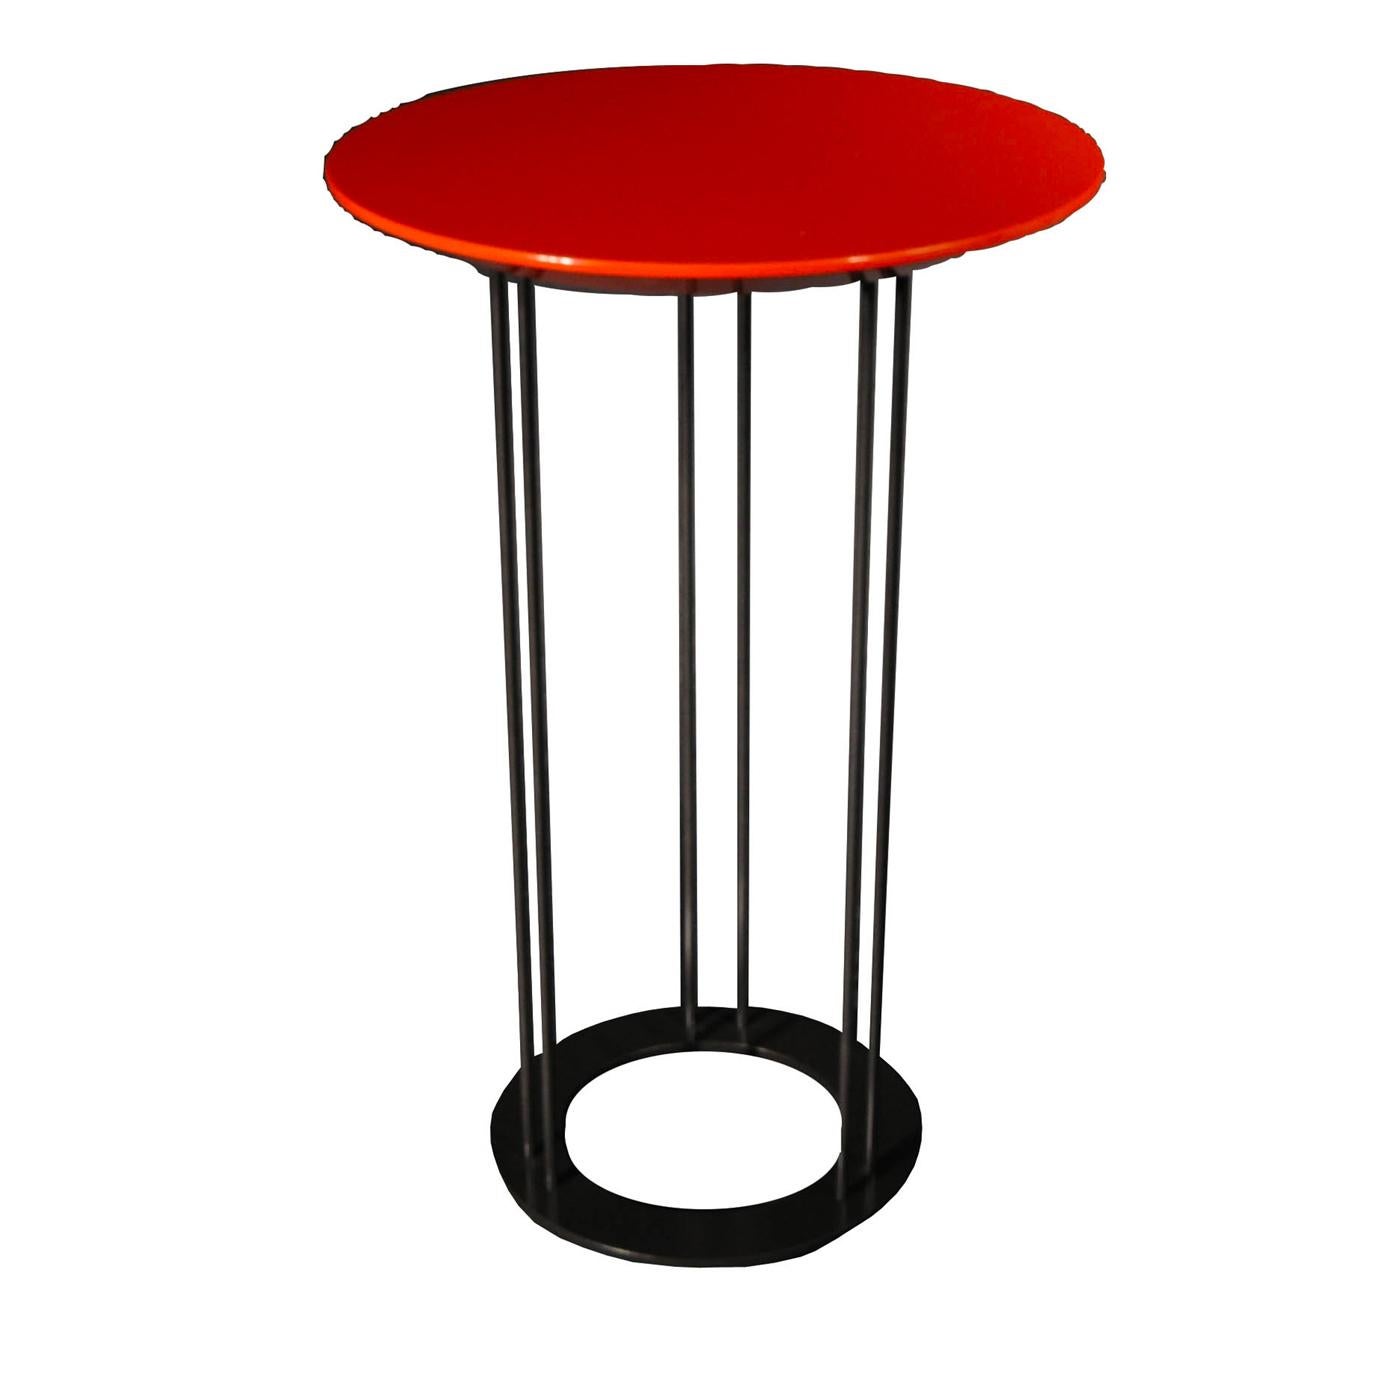 A testament to contemporary aesthetic, this stunning tall coffee table is marked by clean, geometric lines. It features a circular wooden top finished with a shiny coral red polyurethane lacquer, elegantly resting on an eclectic metal structure with